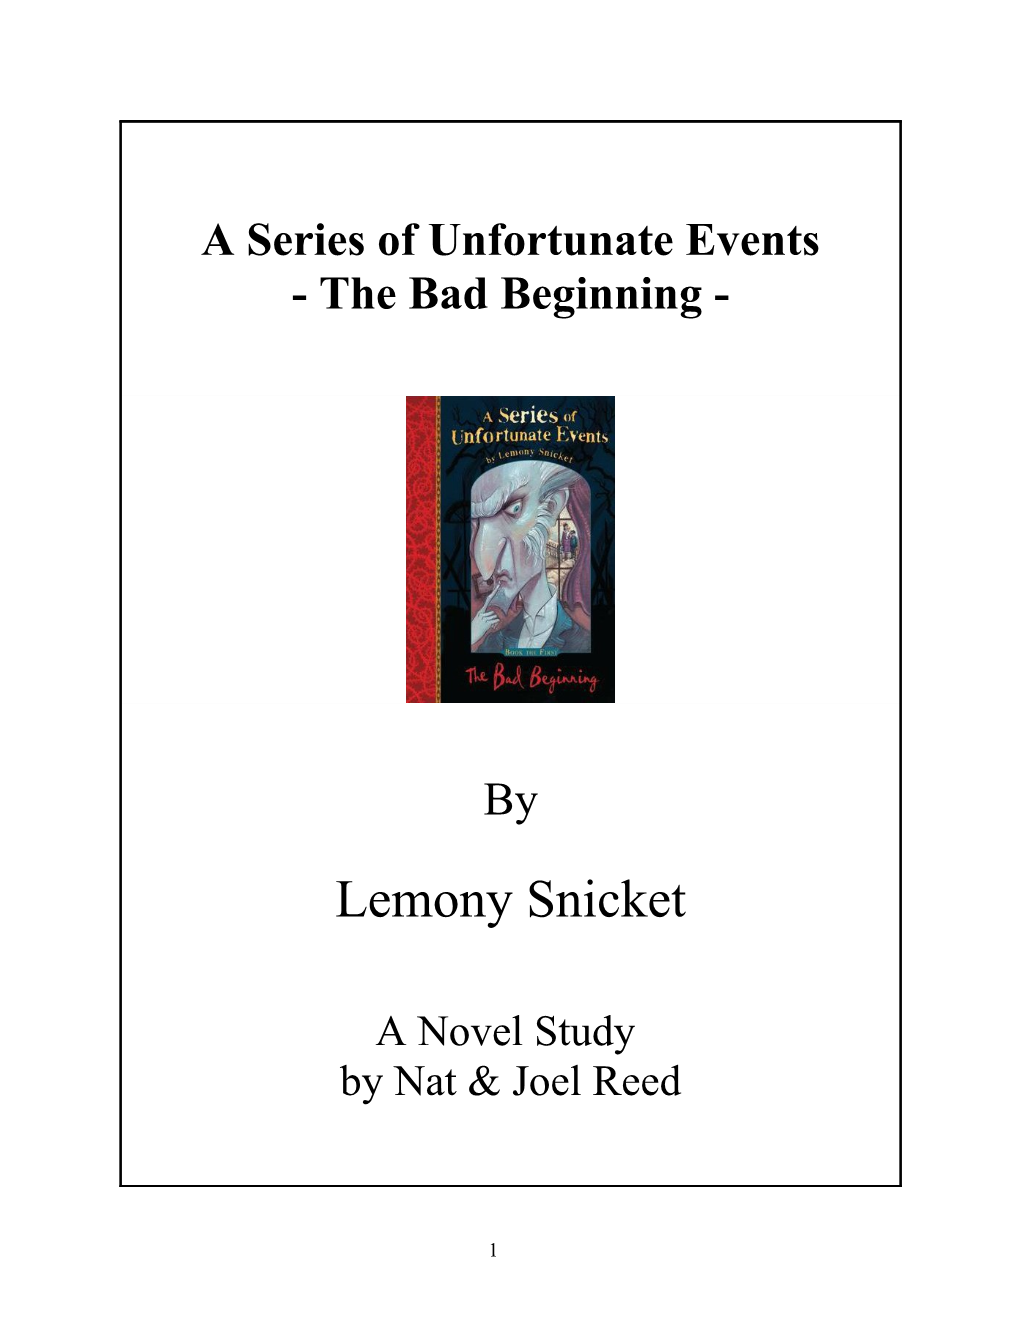 A Series of Unfortunate Events - the Bad Beginning